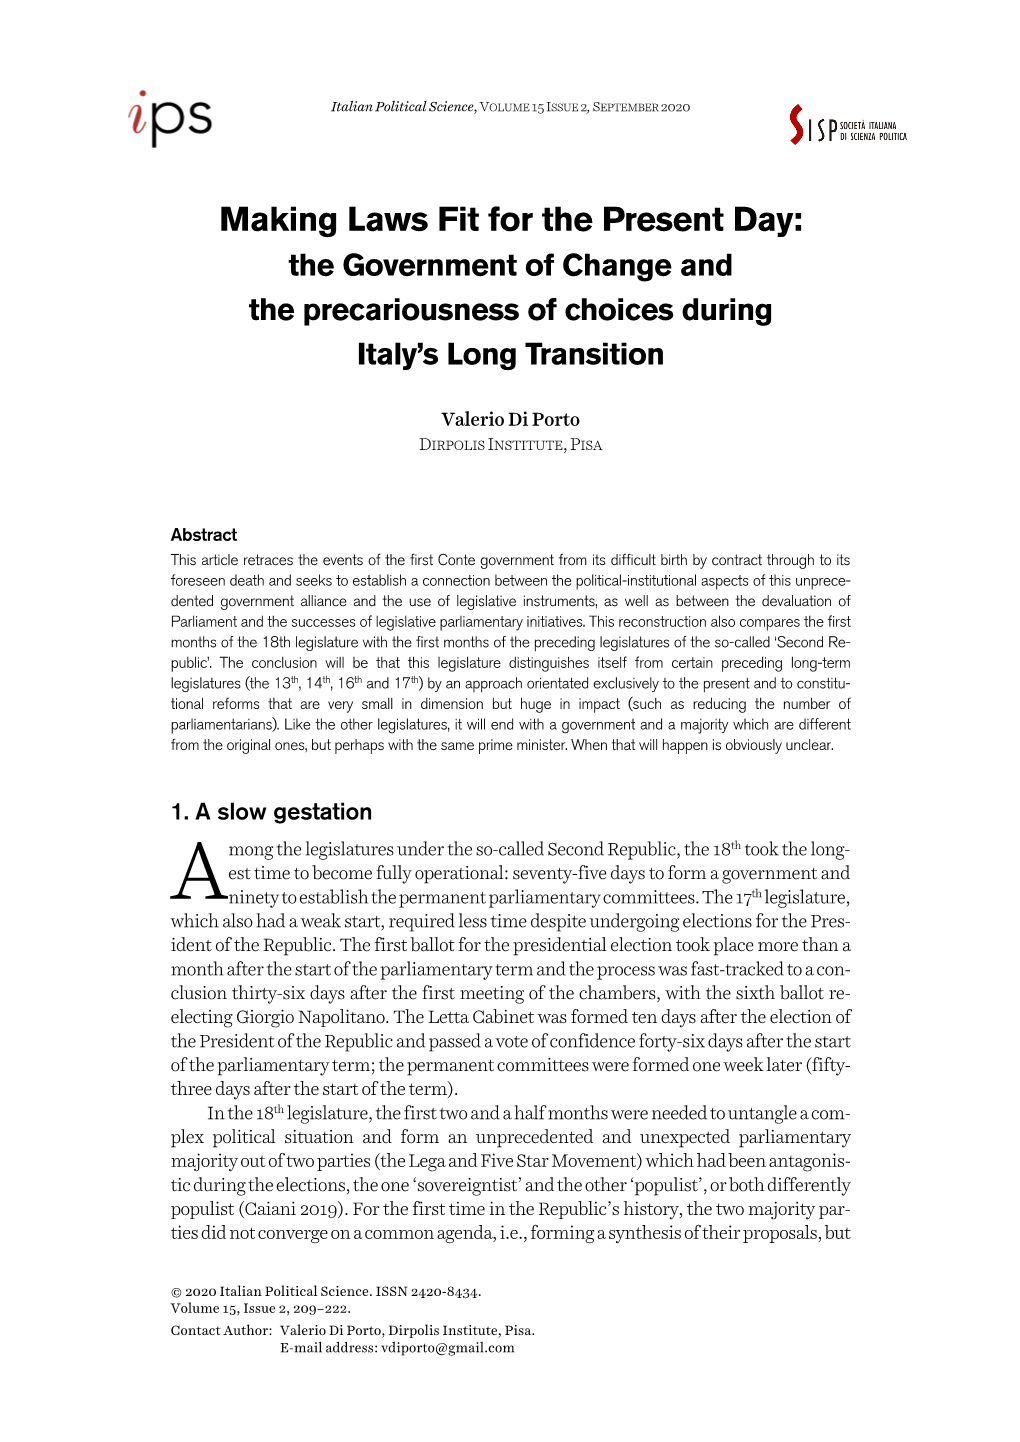 Making Laws Fit for the Present Day: the Government of Change and the Precariousness of Choices During Italy’S Long Transition